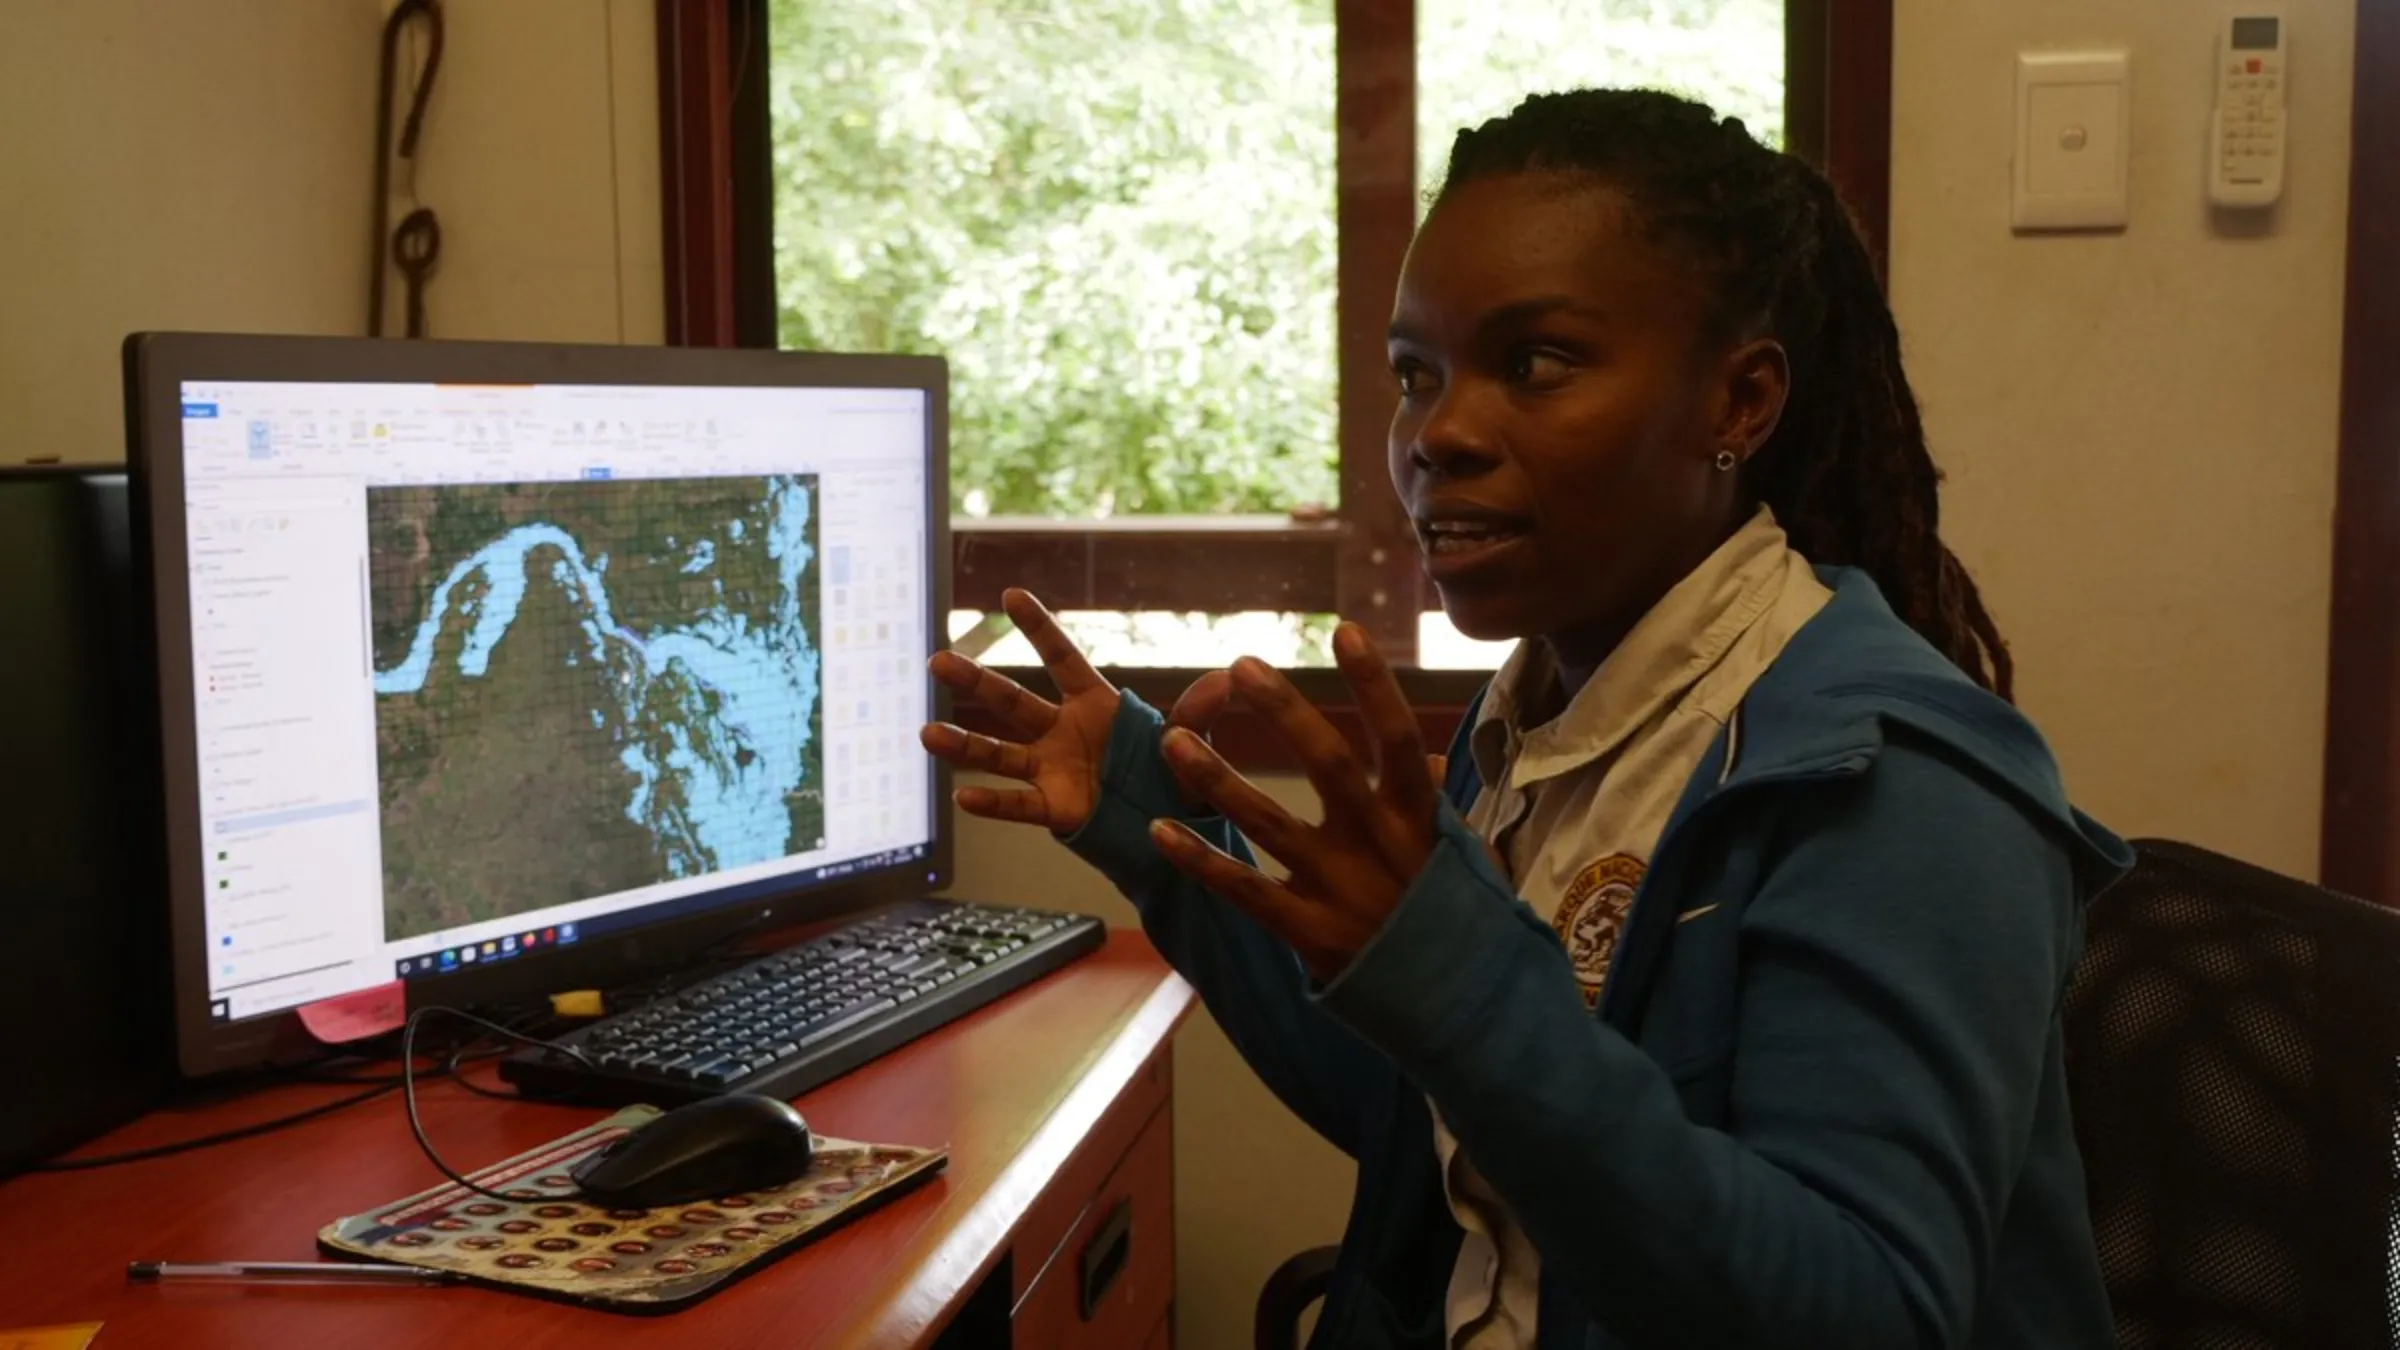 Margardia Victor, a Geographic Information System (GIS) expert working at Gorongosa National Park, shows how the reserve’s technology was used to map flood areas during Cyclone Idai, which slammed that area of Mozambique in 2019, May 23, 2022